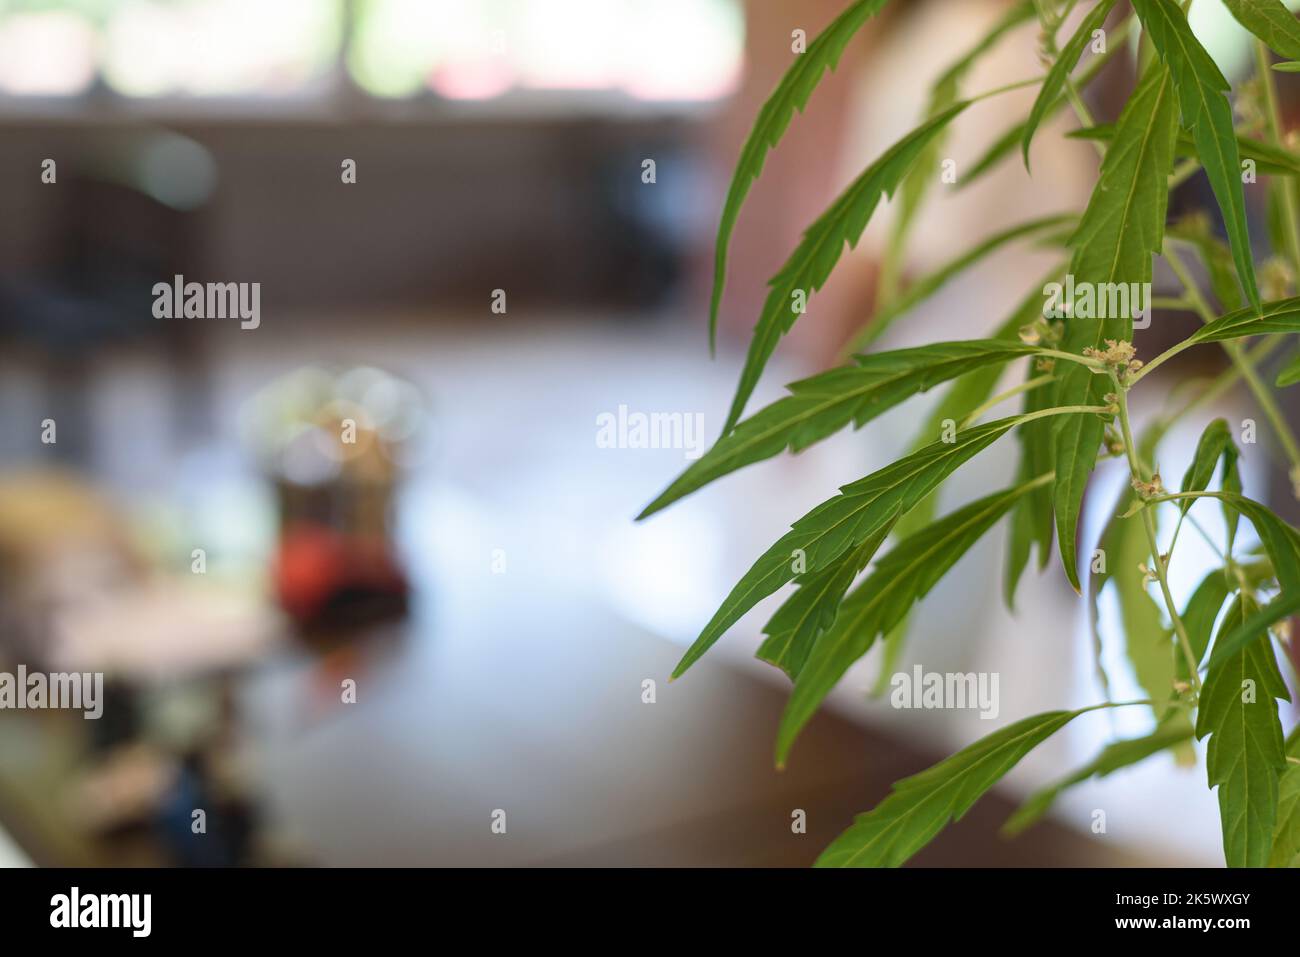 Planted cannabis growing in pot against blurry empty office Stock Photo